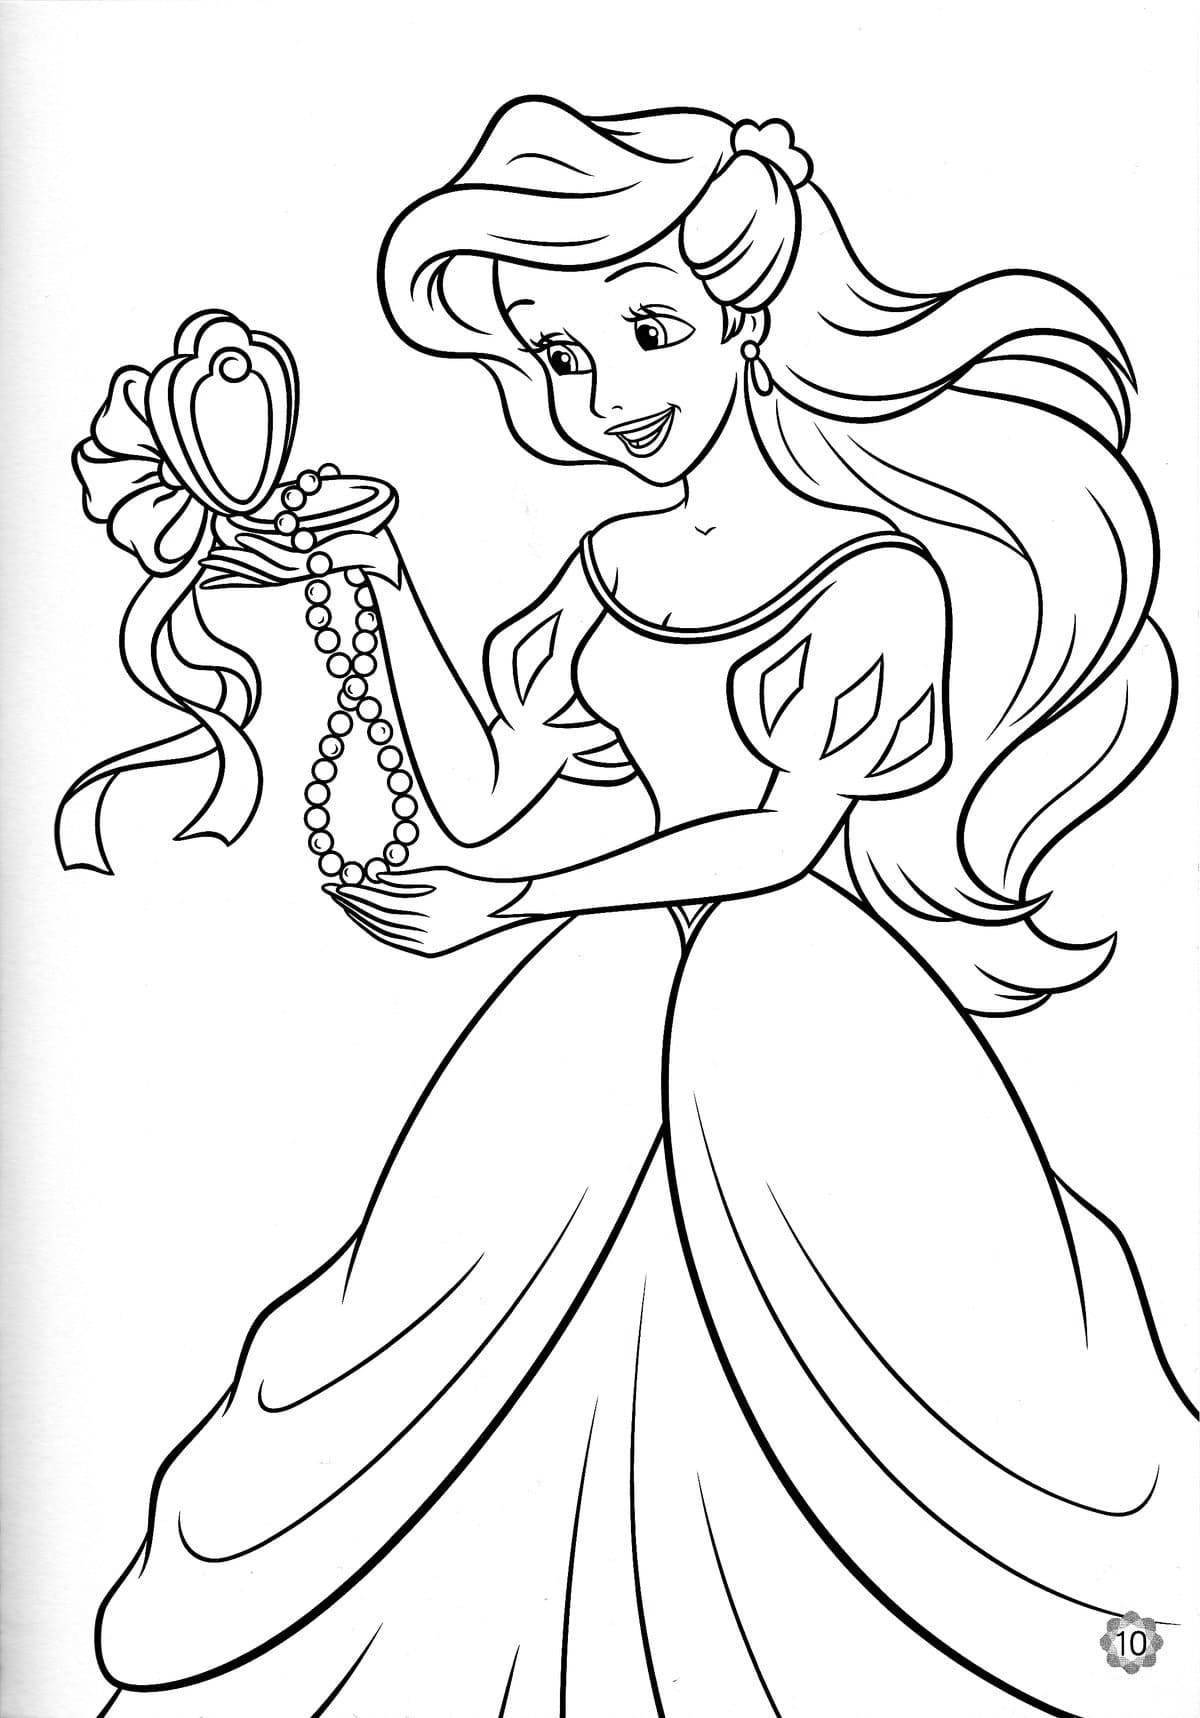 Incredible coloring book for girls with disney princesses